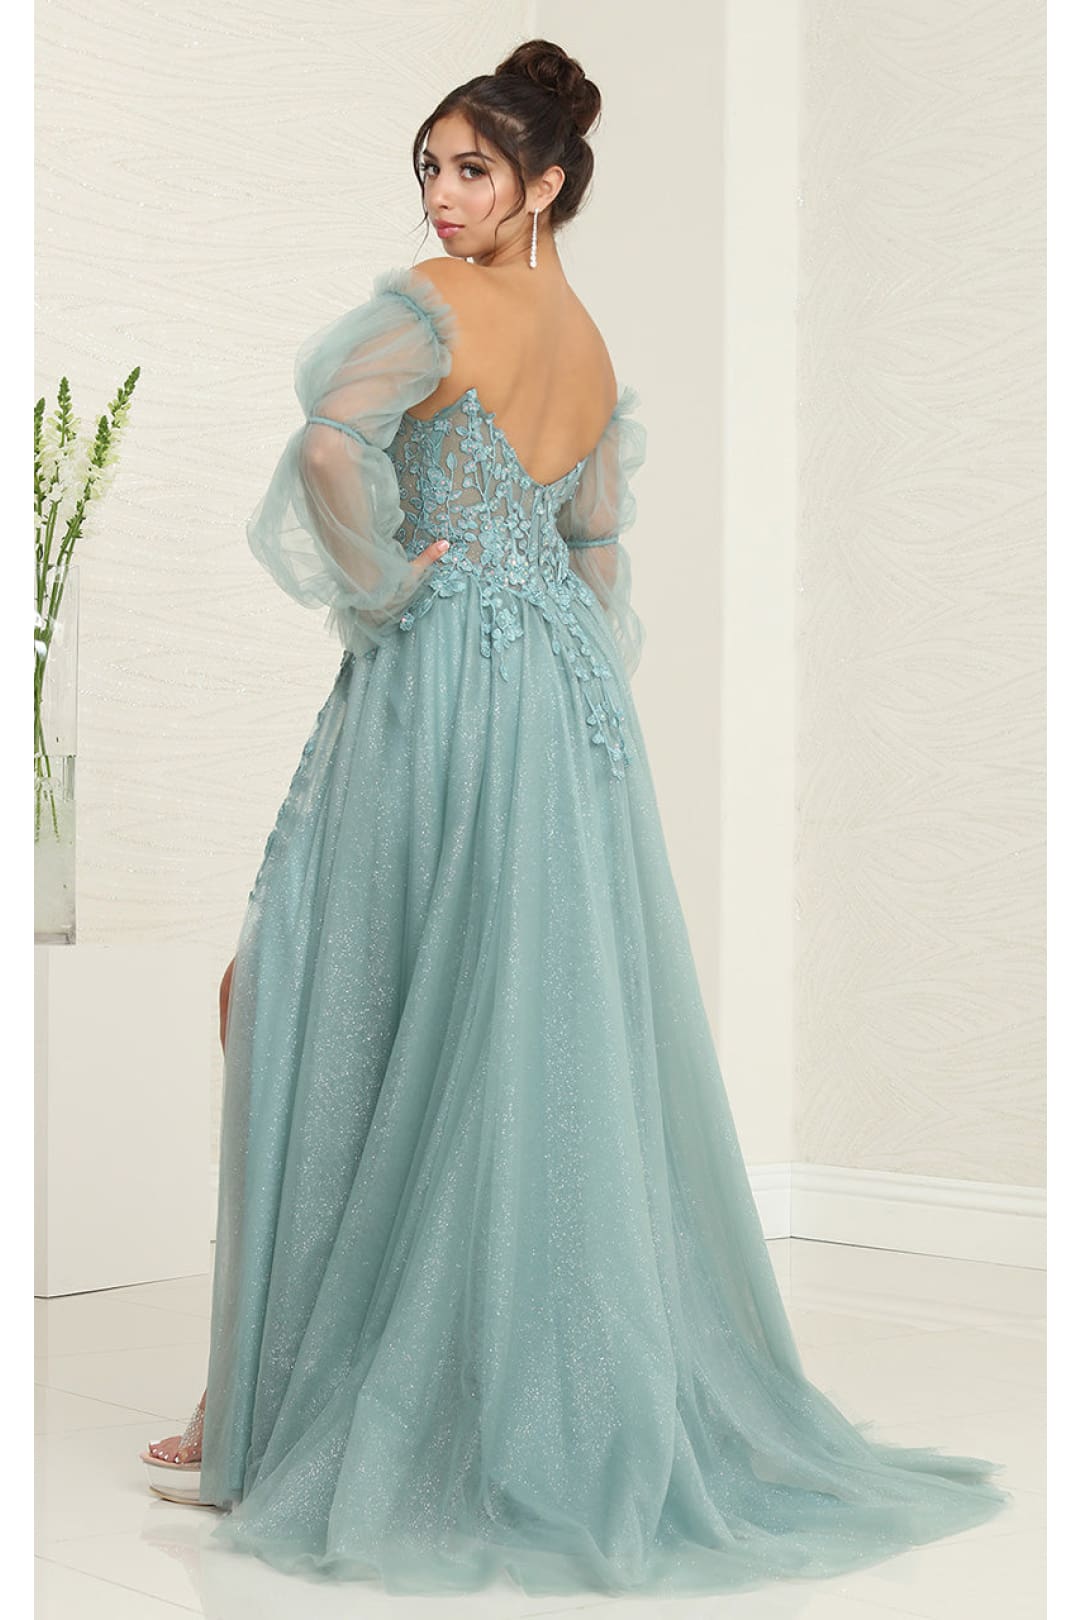 Royal Queen RQ8060 Strapless Puffy Detachable Sleeves A-line Sage Gown - Dress